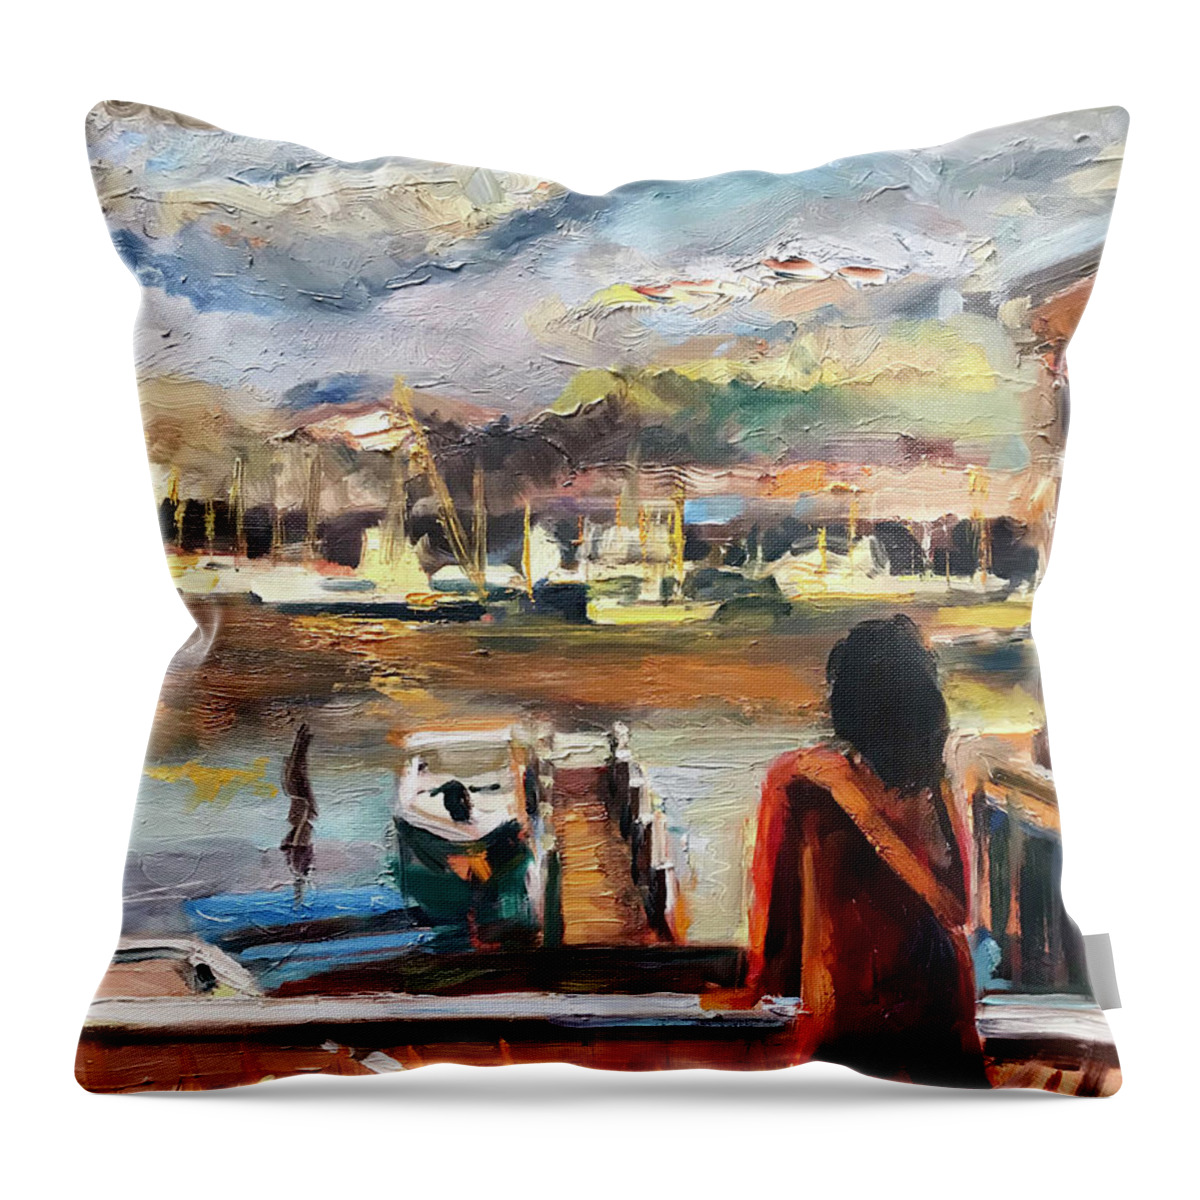 The Artist Josef Throw Pillow featuring the painting Bay Street Tellin morning by Josef Kelly